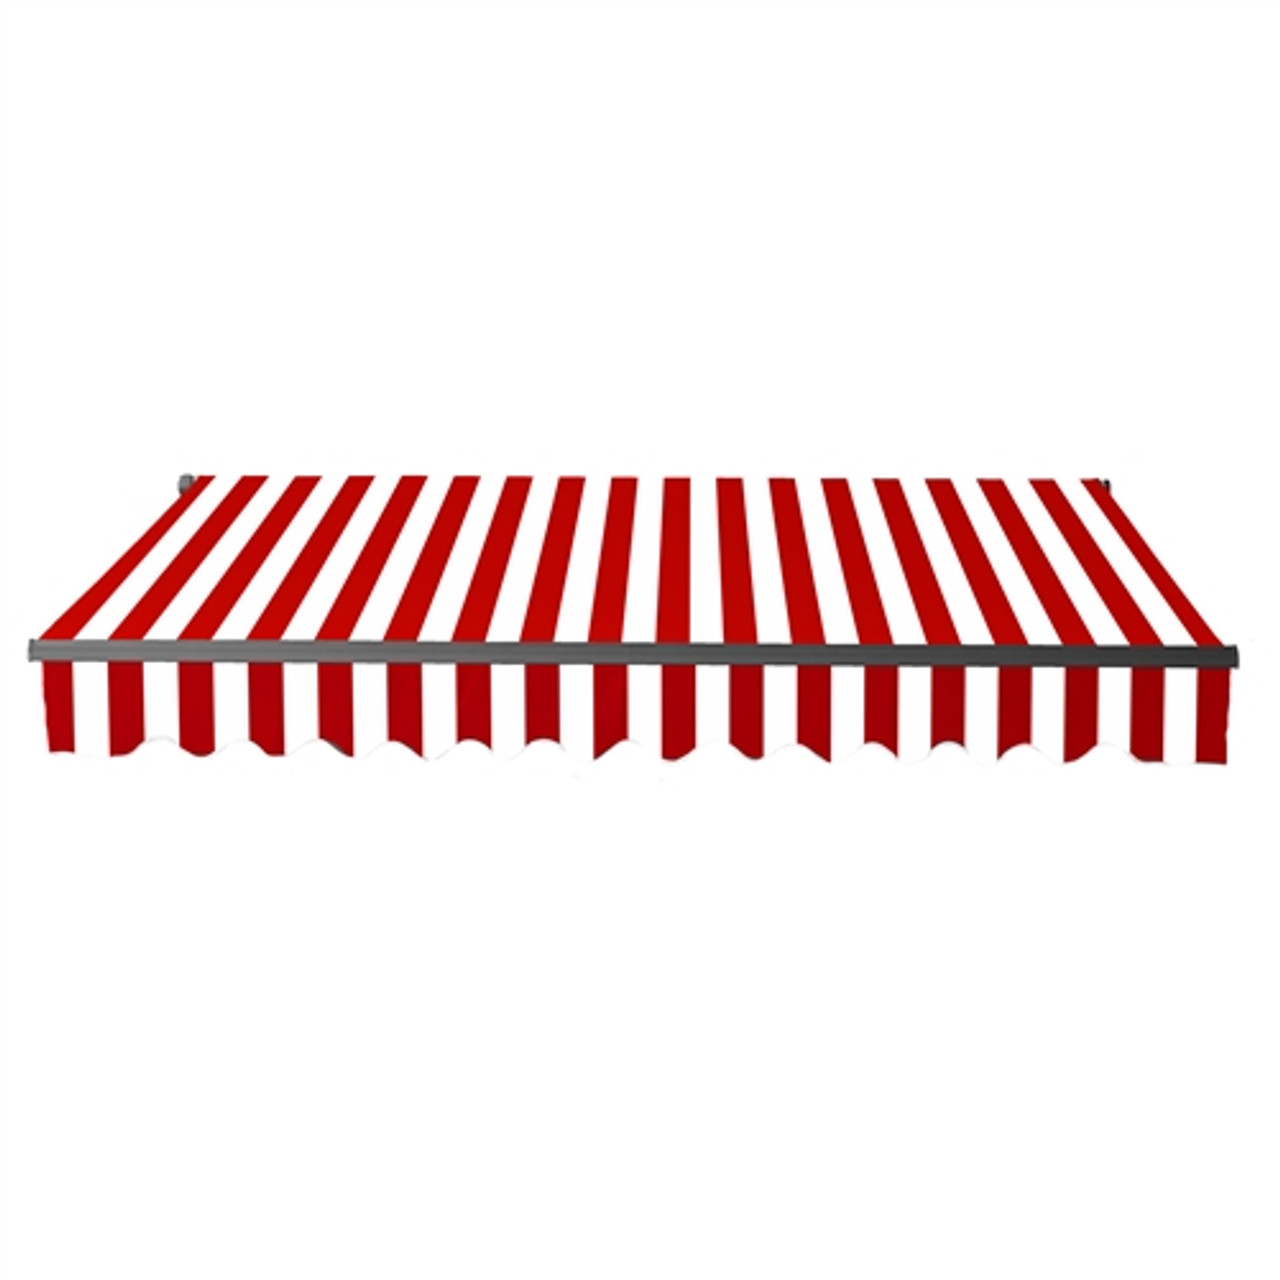 Motorized Retractable Black Frame Patio Awning 16 x 10 Feet - Red and White  Stripes